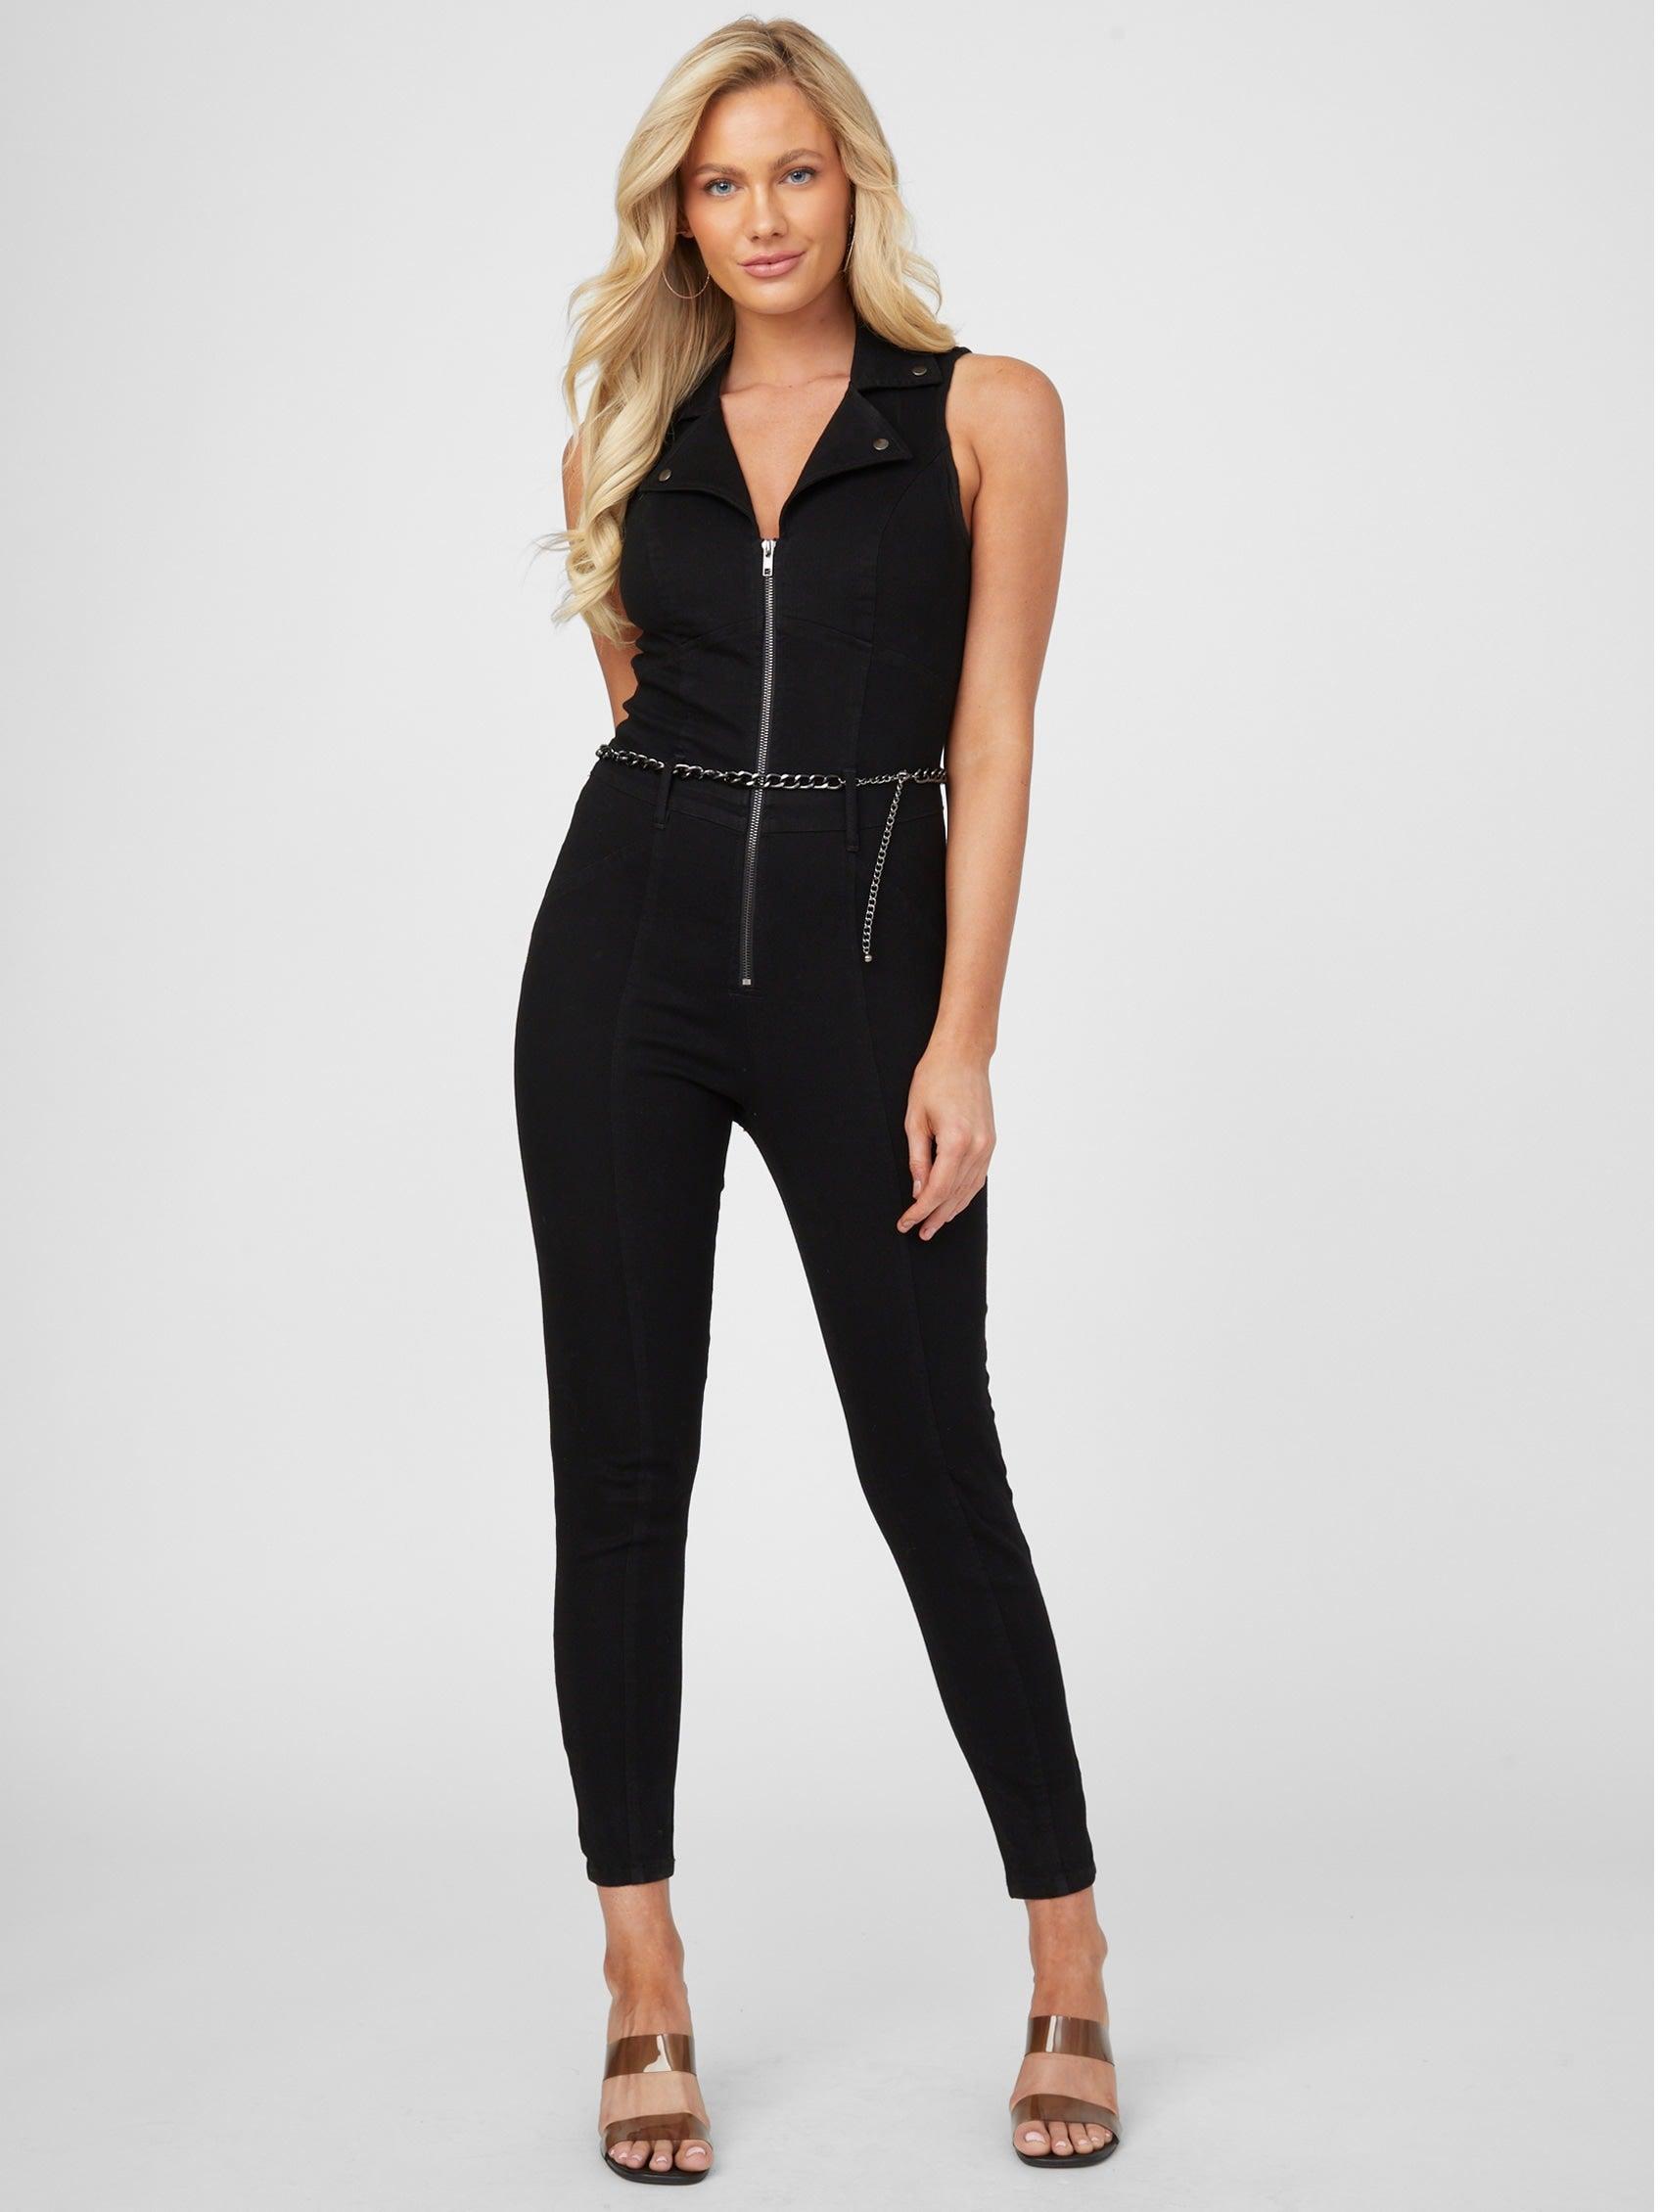 Guess Factory Eco Beckly Moto Denim Jumpsuit in Black | Lyst